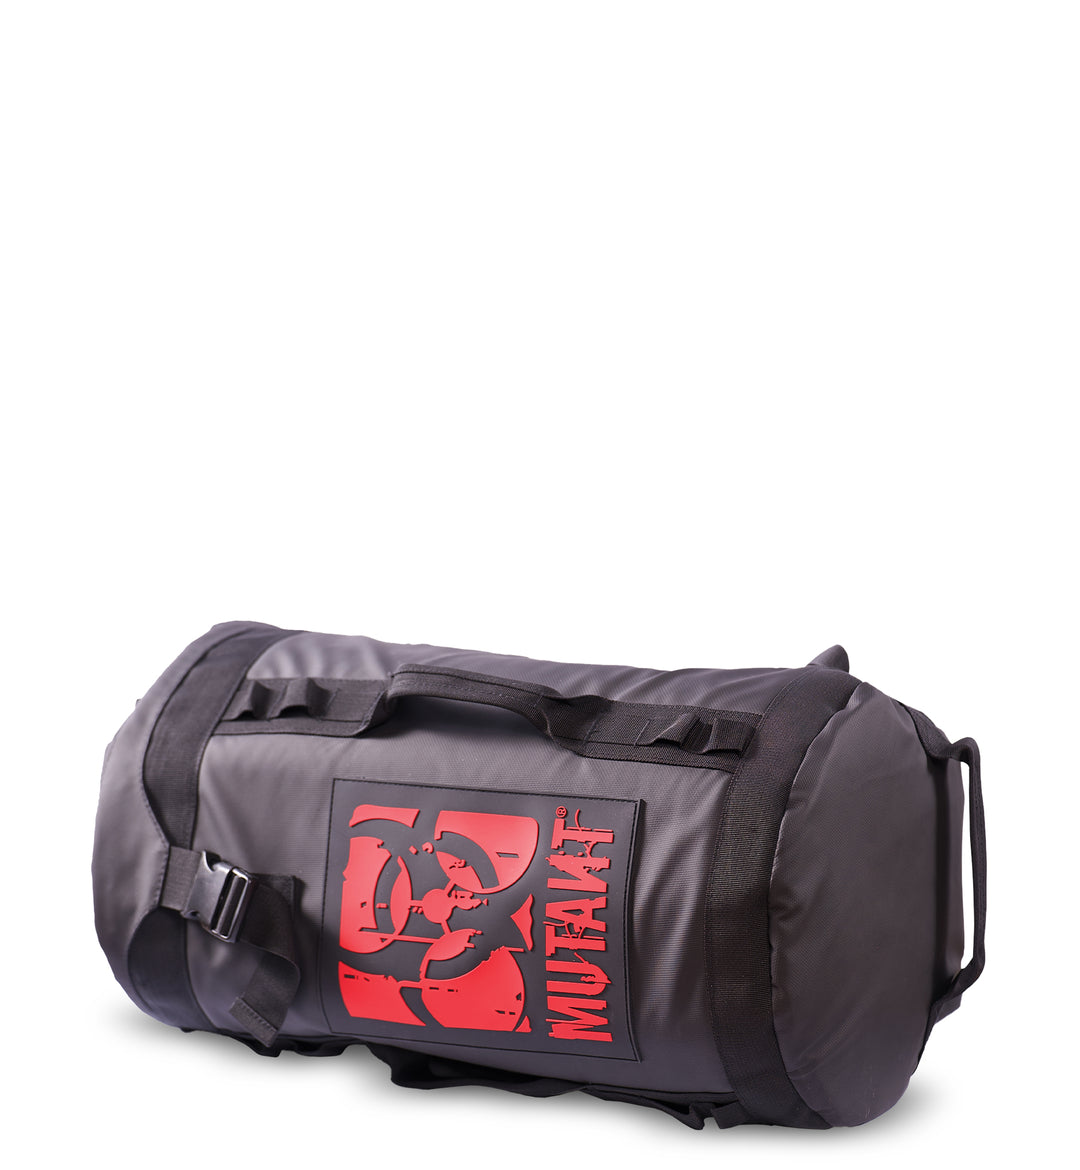 The black Military Top Load Duffel Backpack with a red 'MUTANT' logo at the center, displayed against a white background.